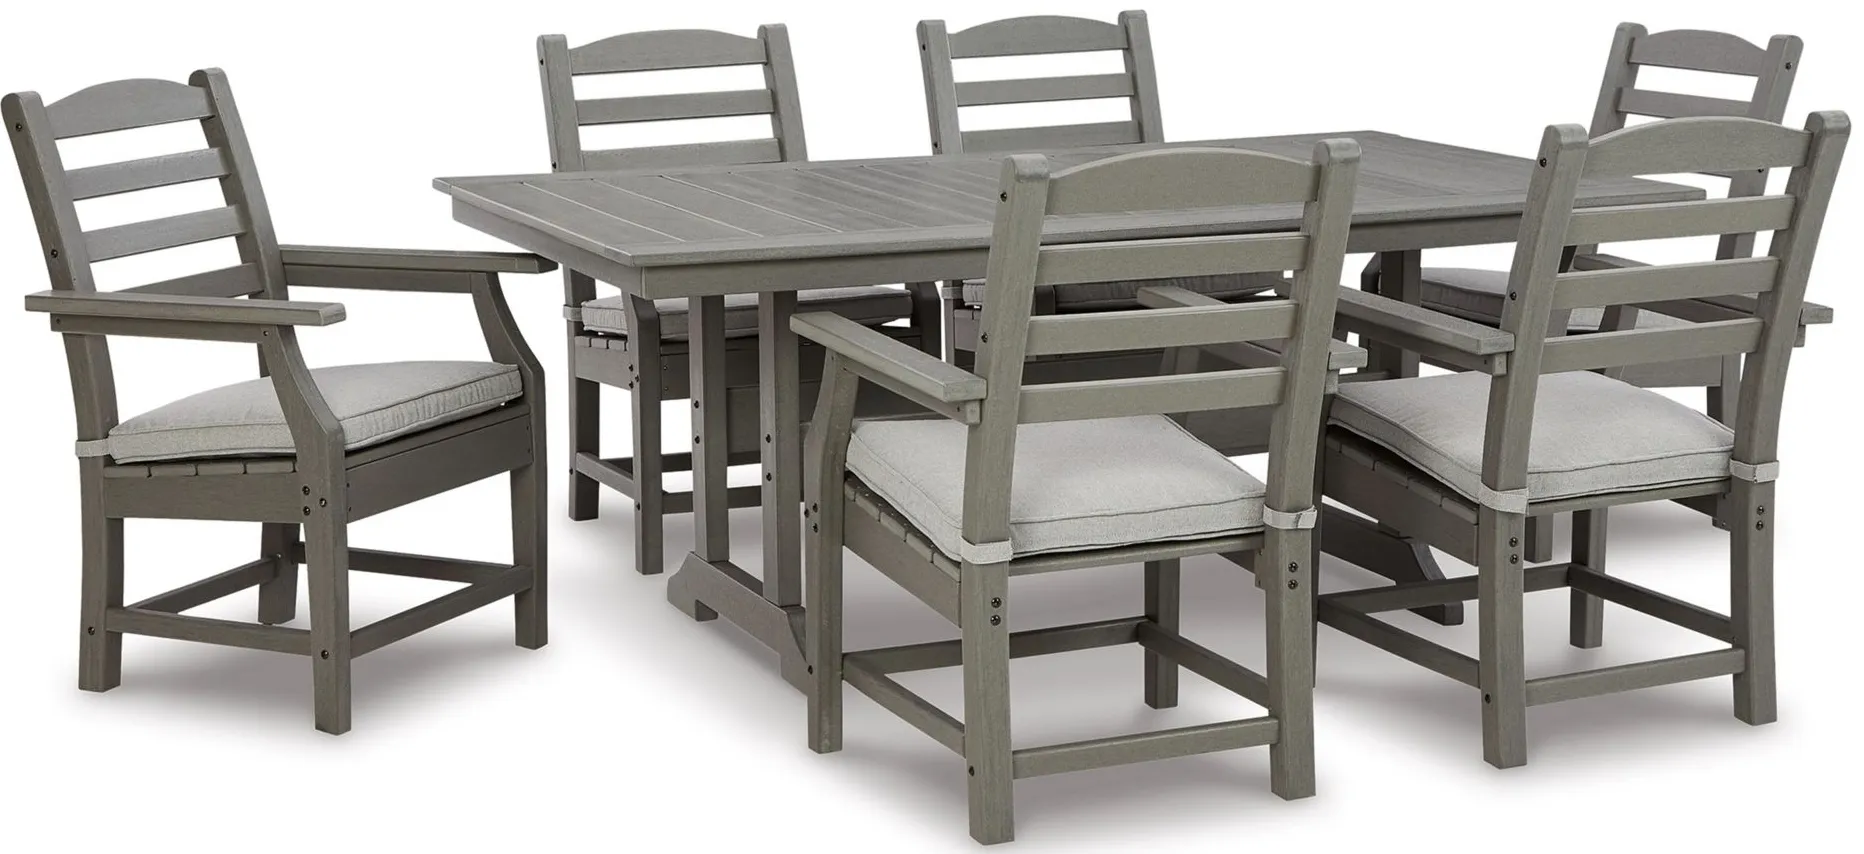 Visola 7-pc. Outdoor Dining Set in Gray by Ashley Furniture